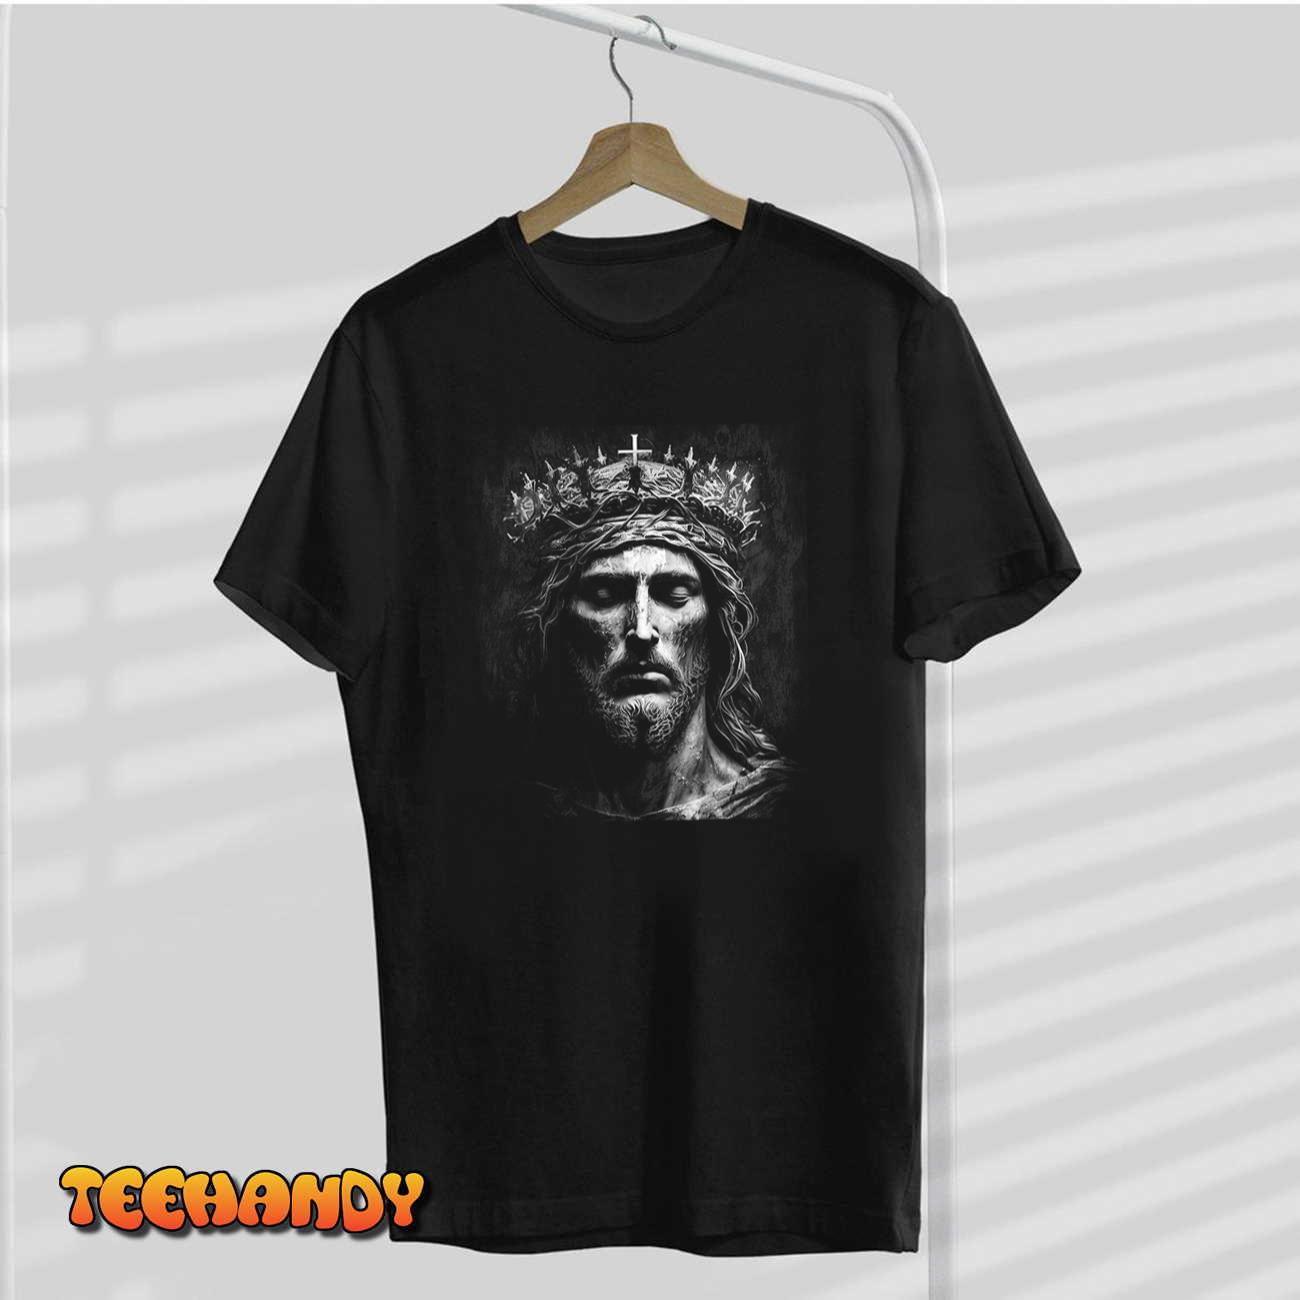 Jesus Christ King Of Kings Lord of Lords T-Shirt